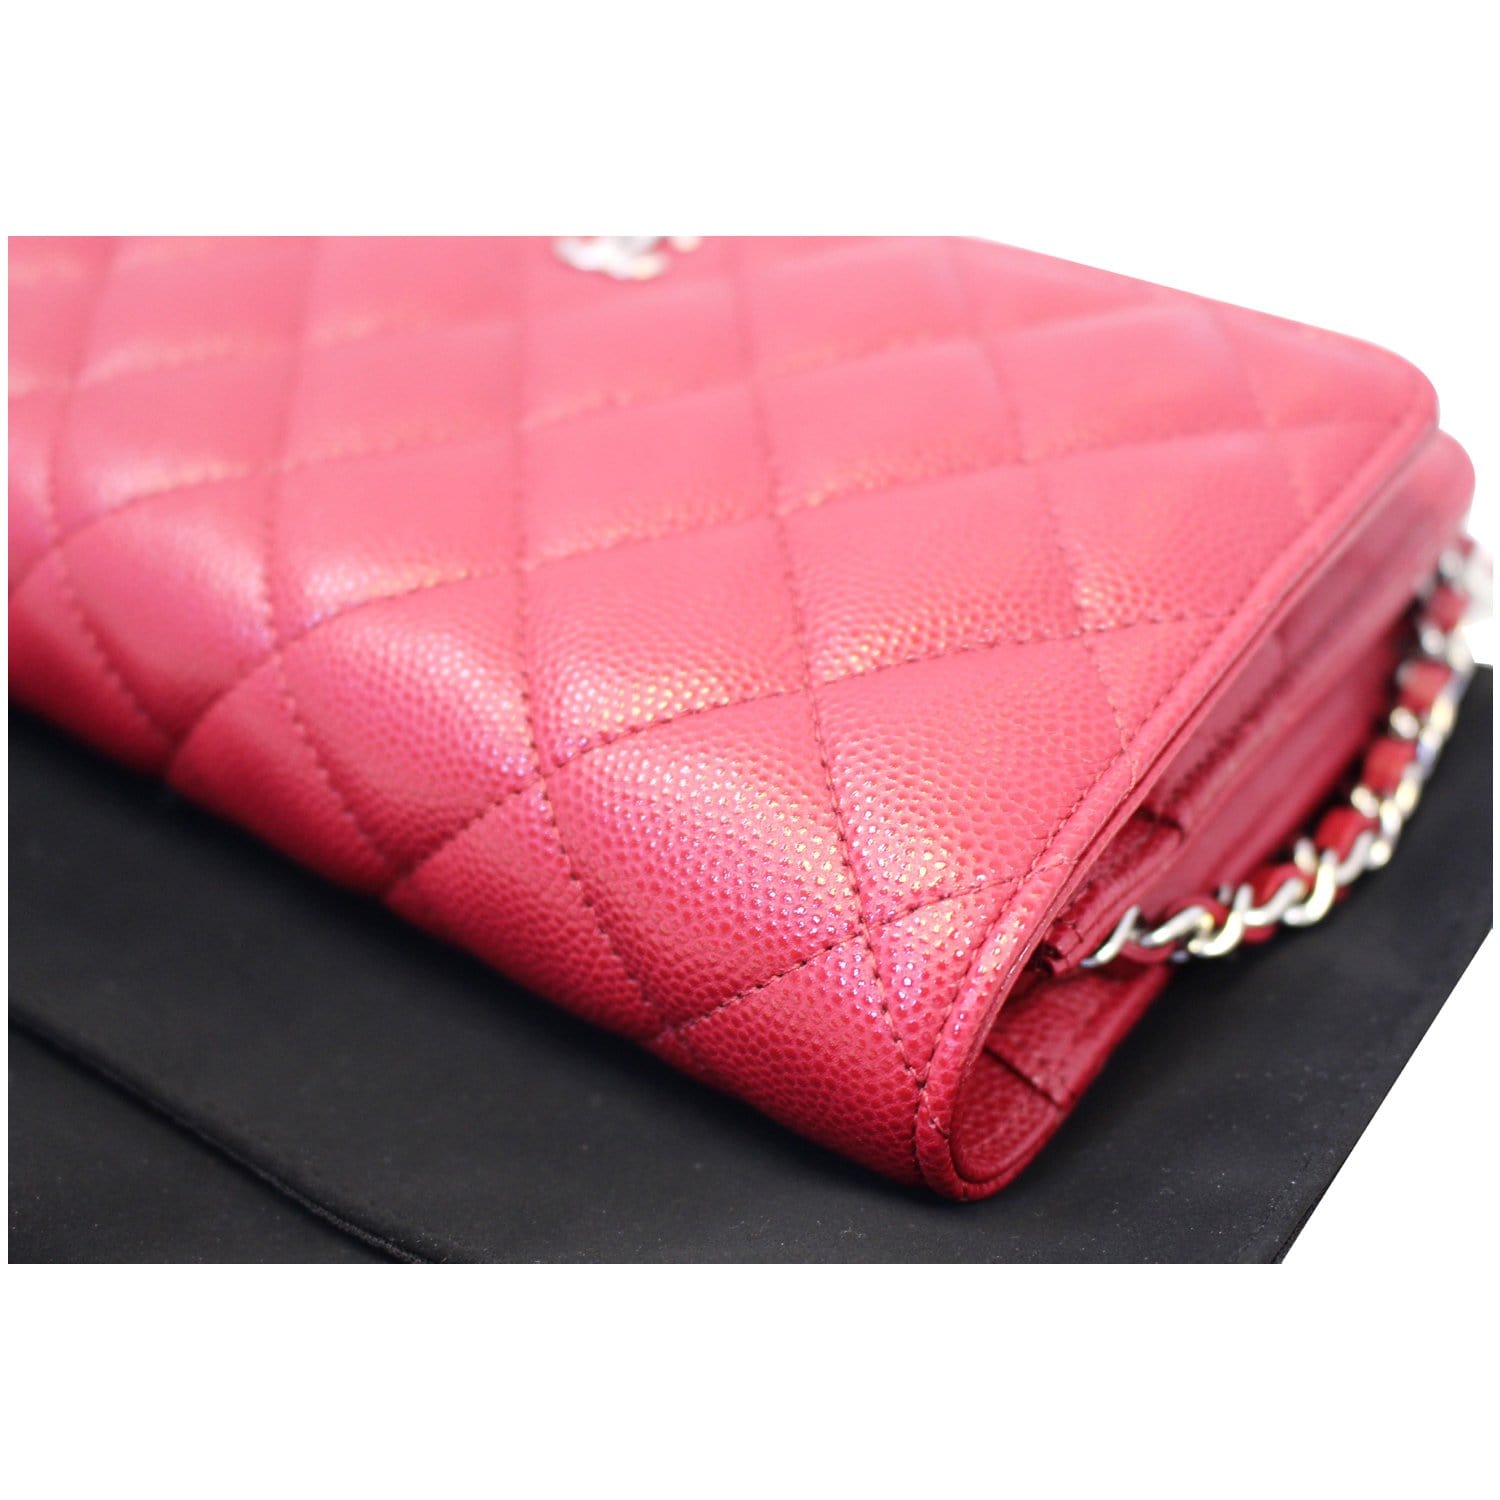 Chanel Dark Red Caviar Leather O-Tech Holder iPad Case with CC, Lot #75012